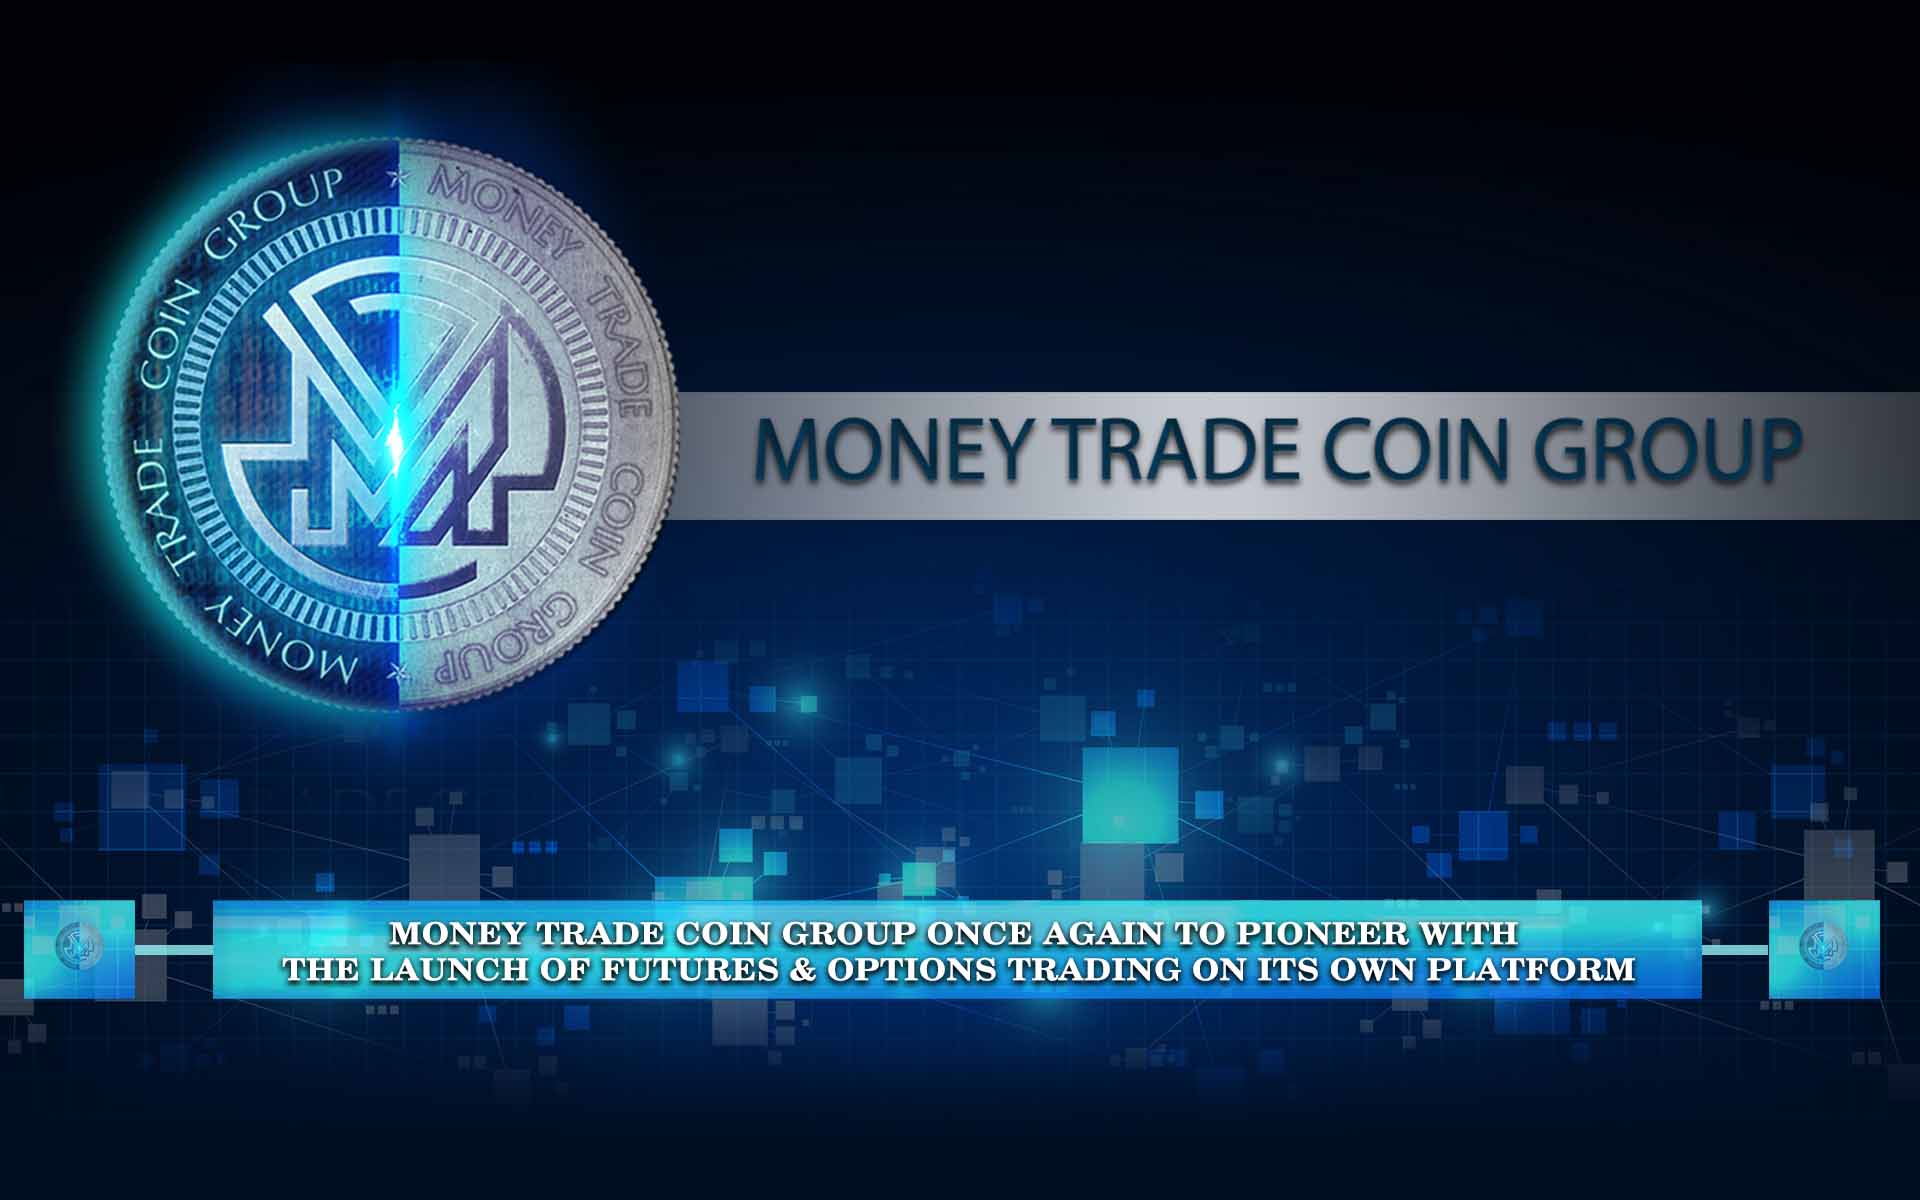 Money Trade Coin Group Once Again to Pioneer with the Launch of Futures & Options Trading on its own Platform